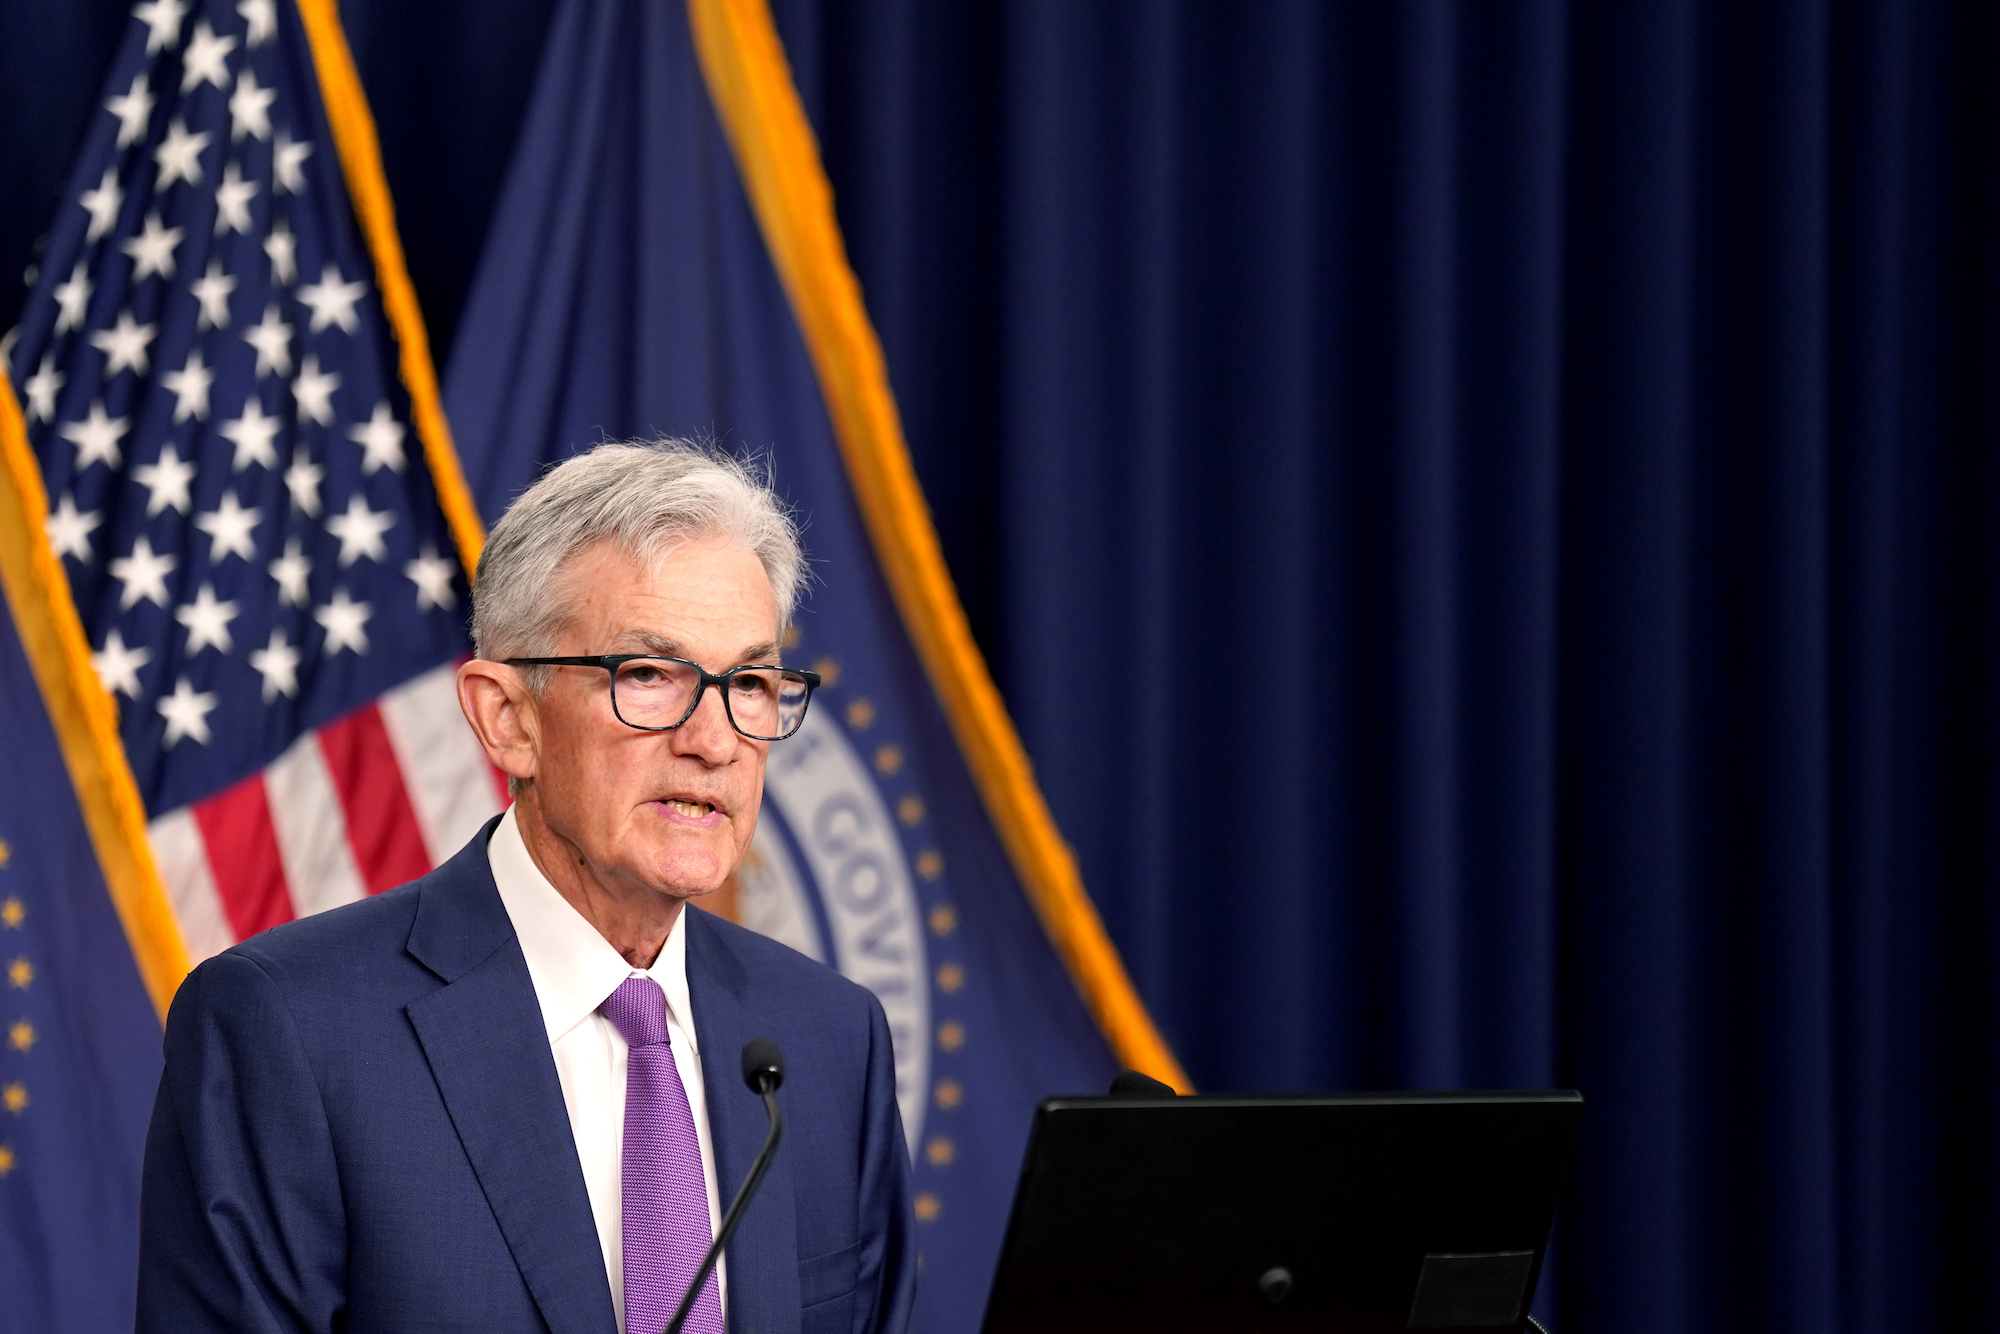 Jerome Powell speaks during a press conference meeting in Washington, DC, on Wednesday.